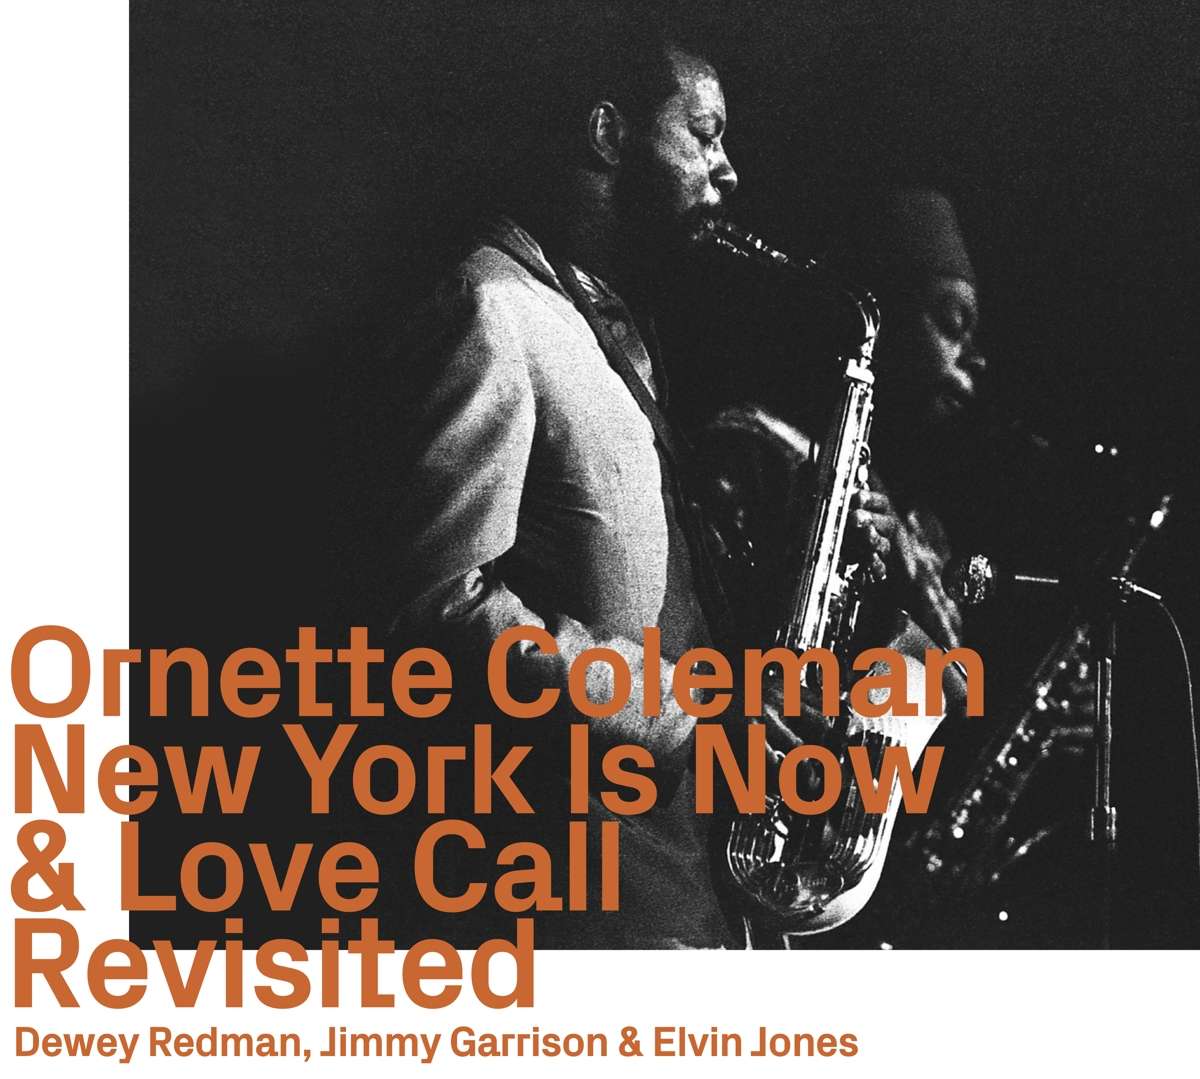 Ornette Coleman – New York Is Now & Love Call Revisited